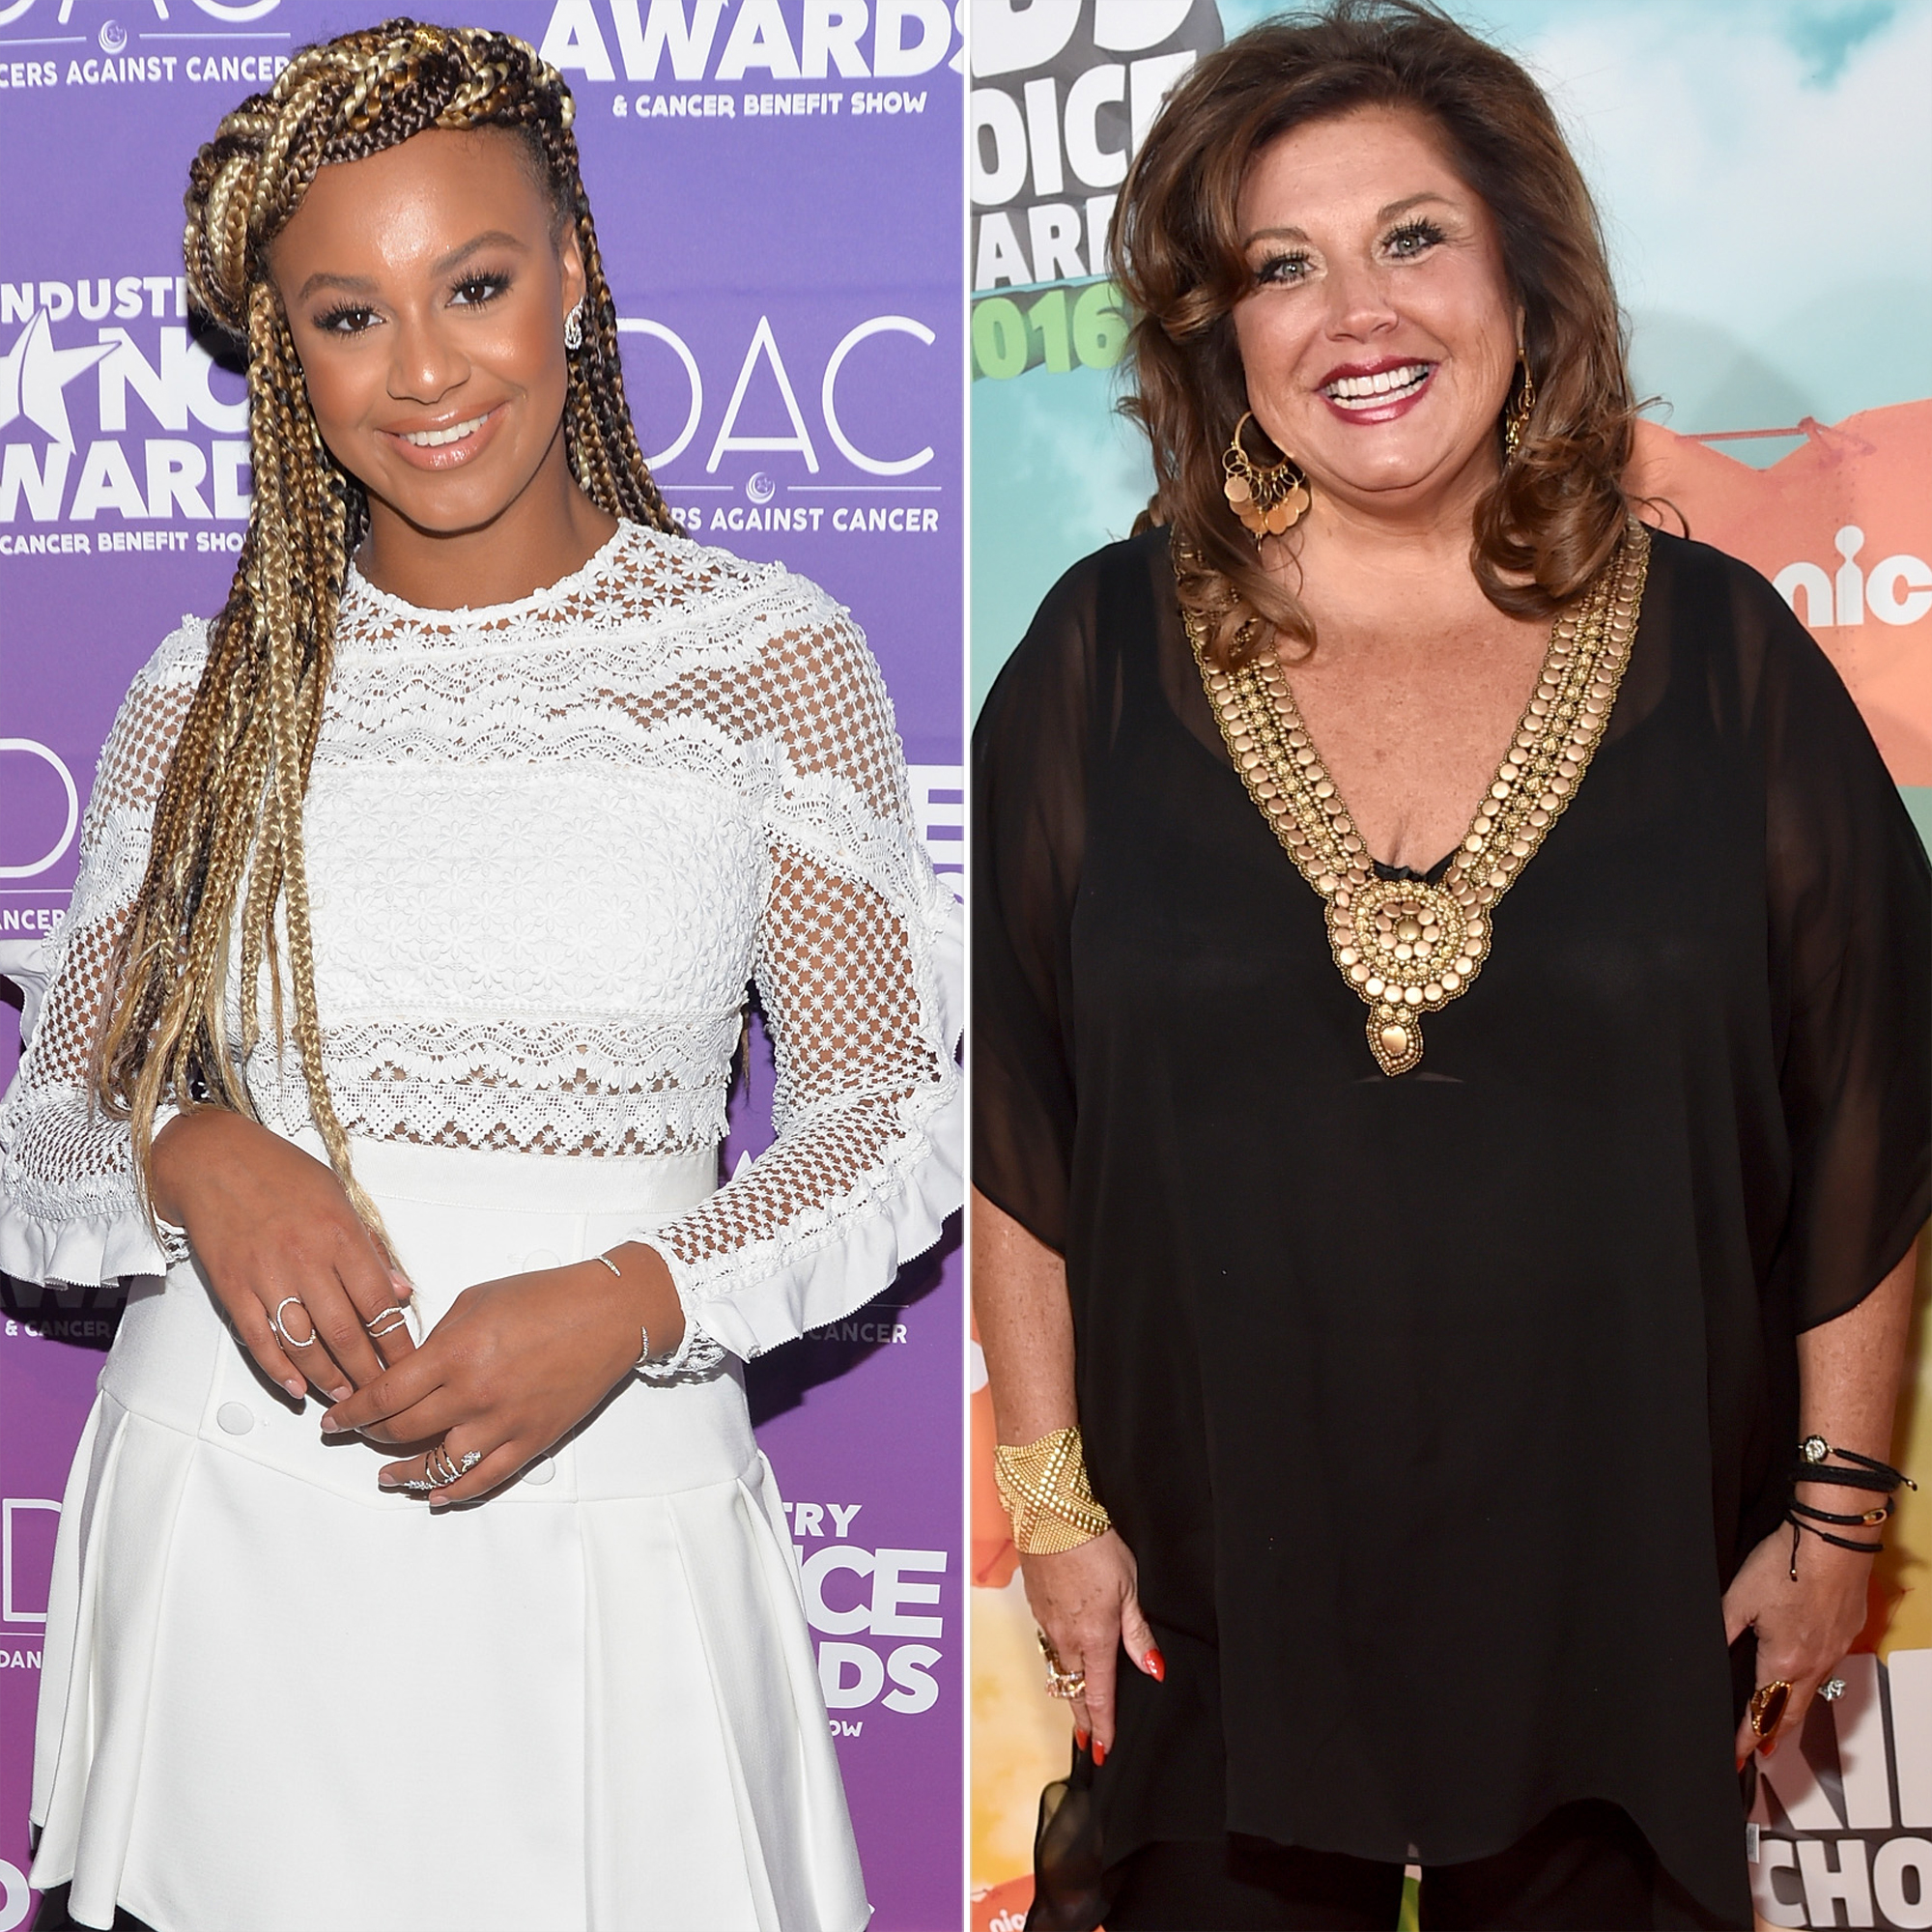 Dance Moms' Star Has Distanced Herself From Abby Lee Miller